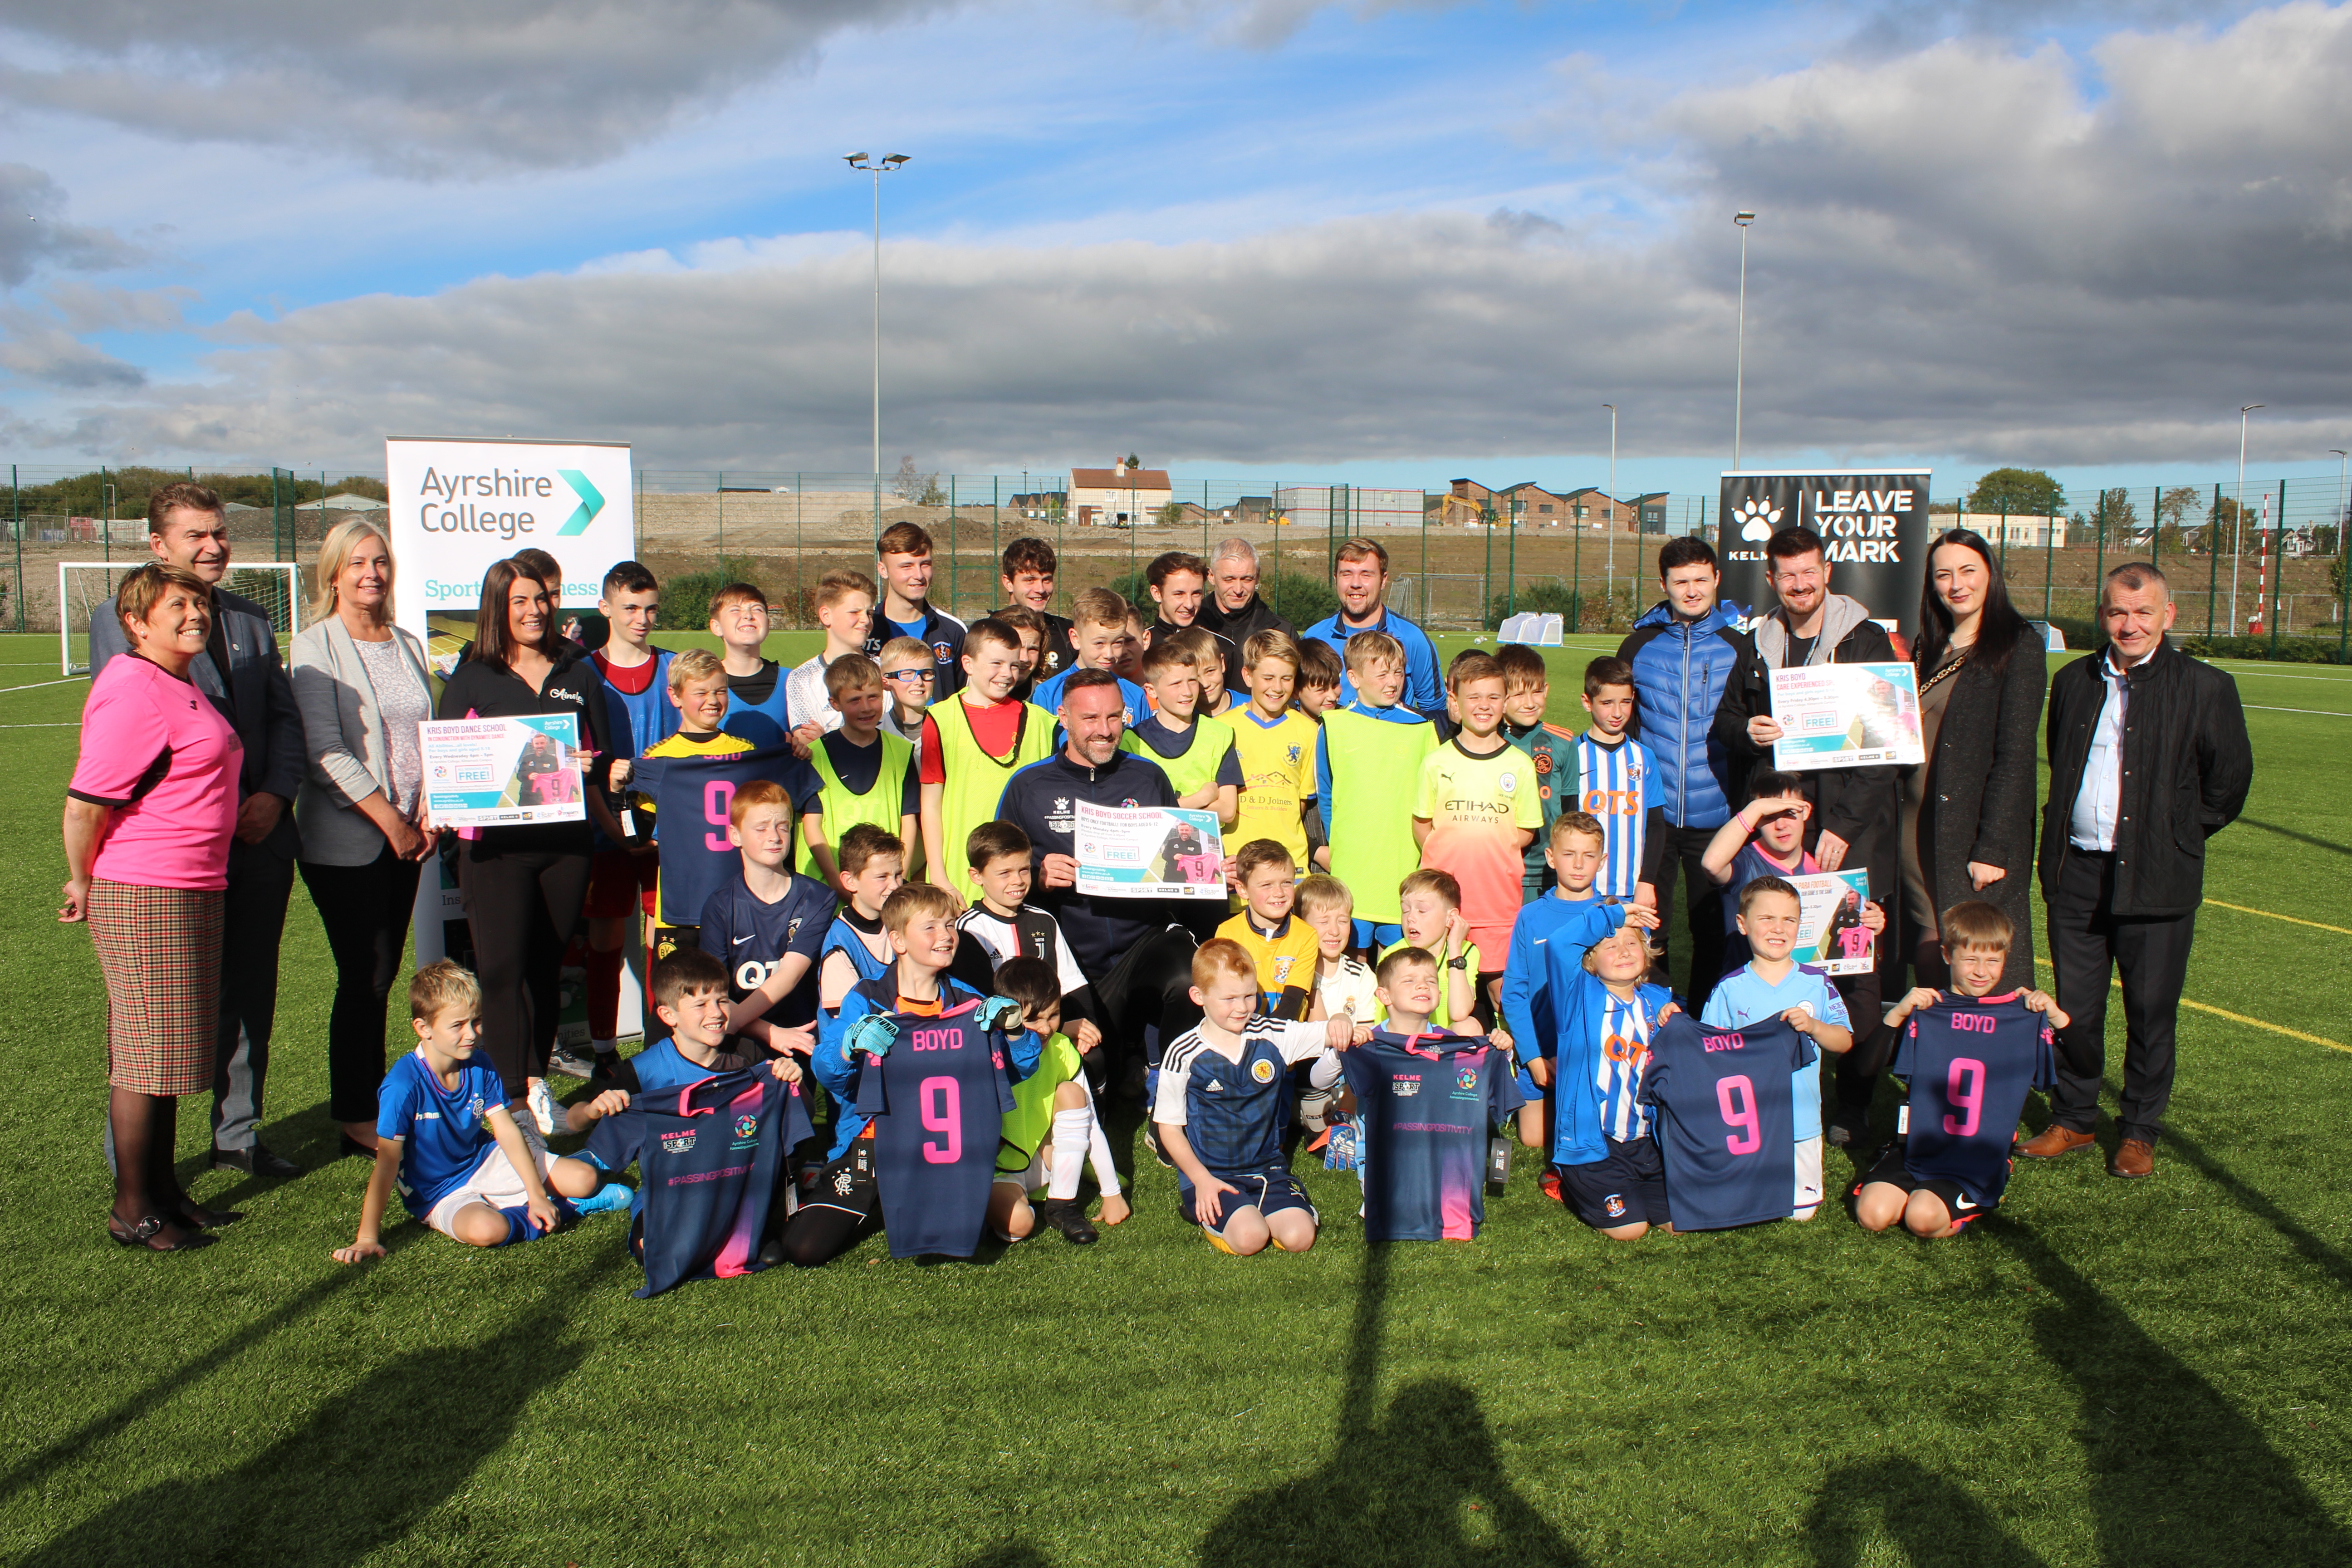 Ayrshire College is Connecting Communities with new sports clubs